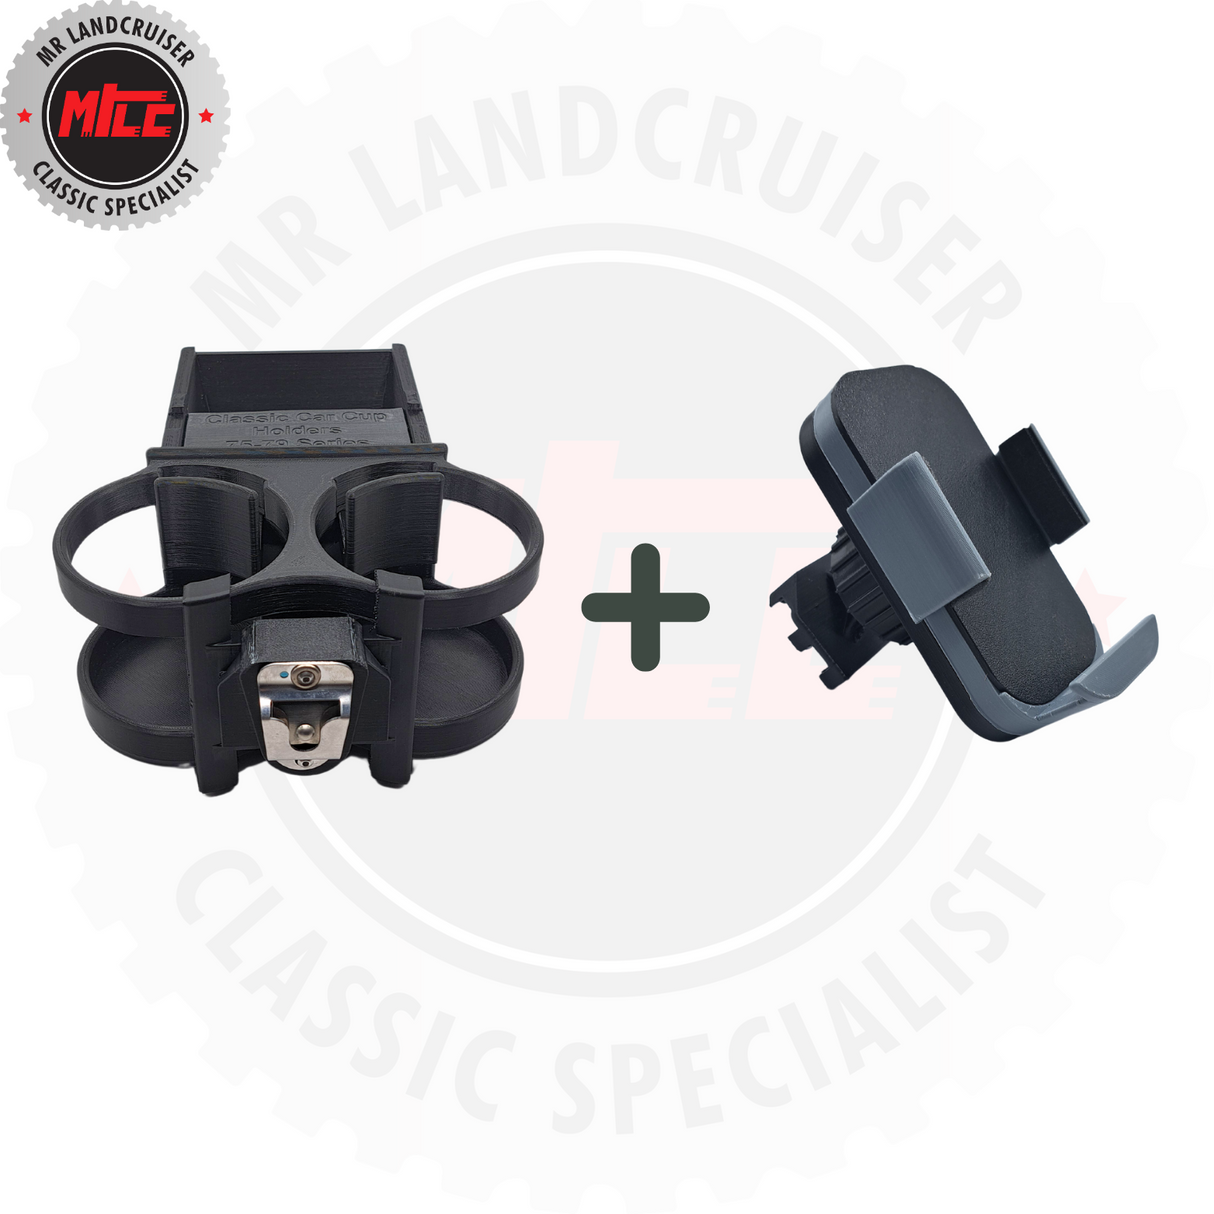 cup holder and phone holder for toyota landcruiser 70 series